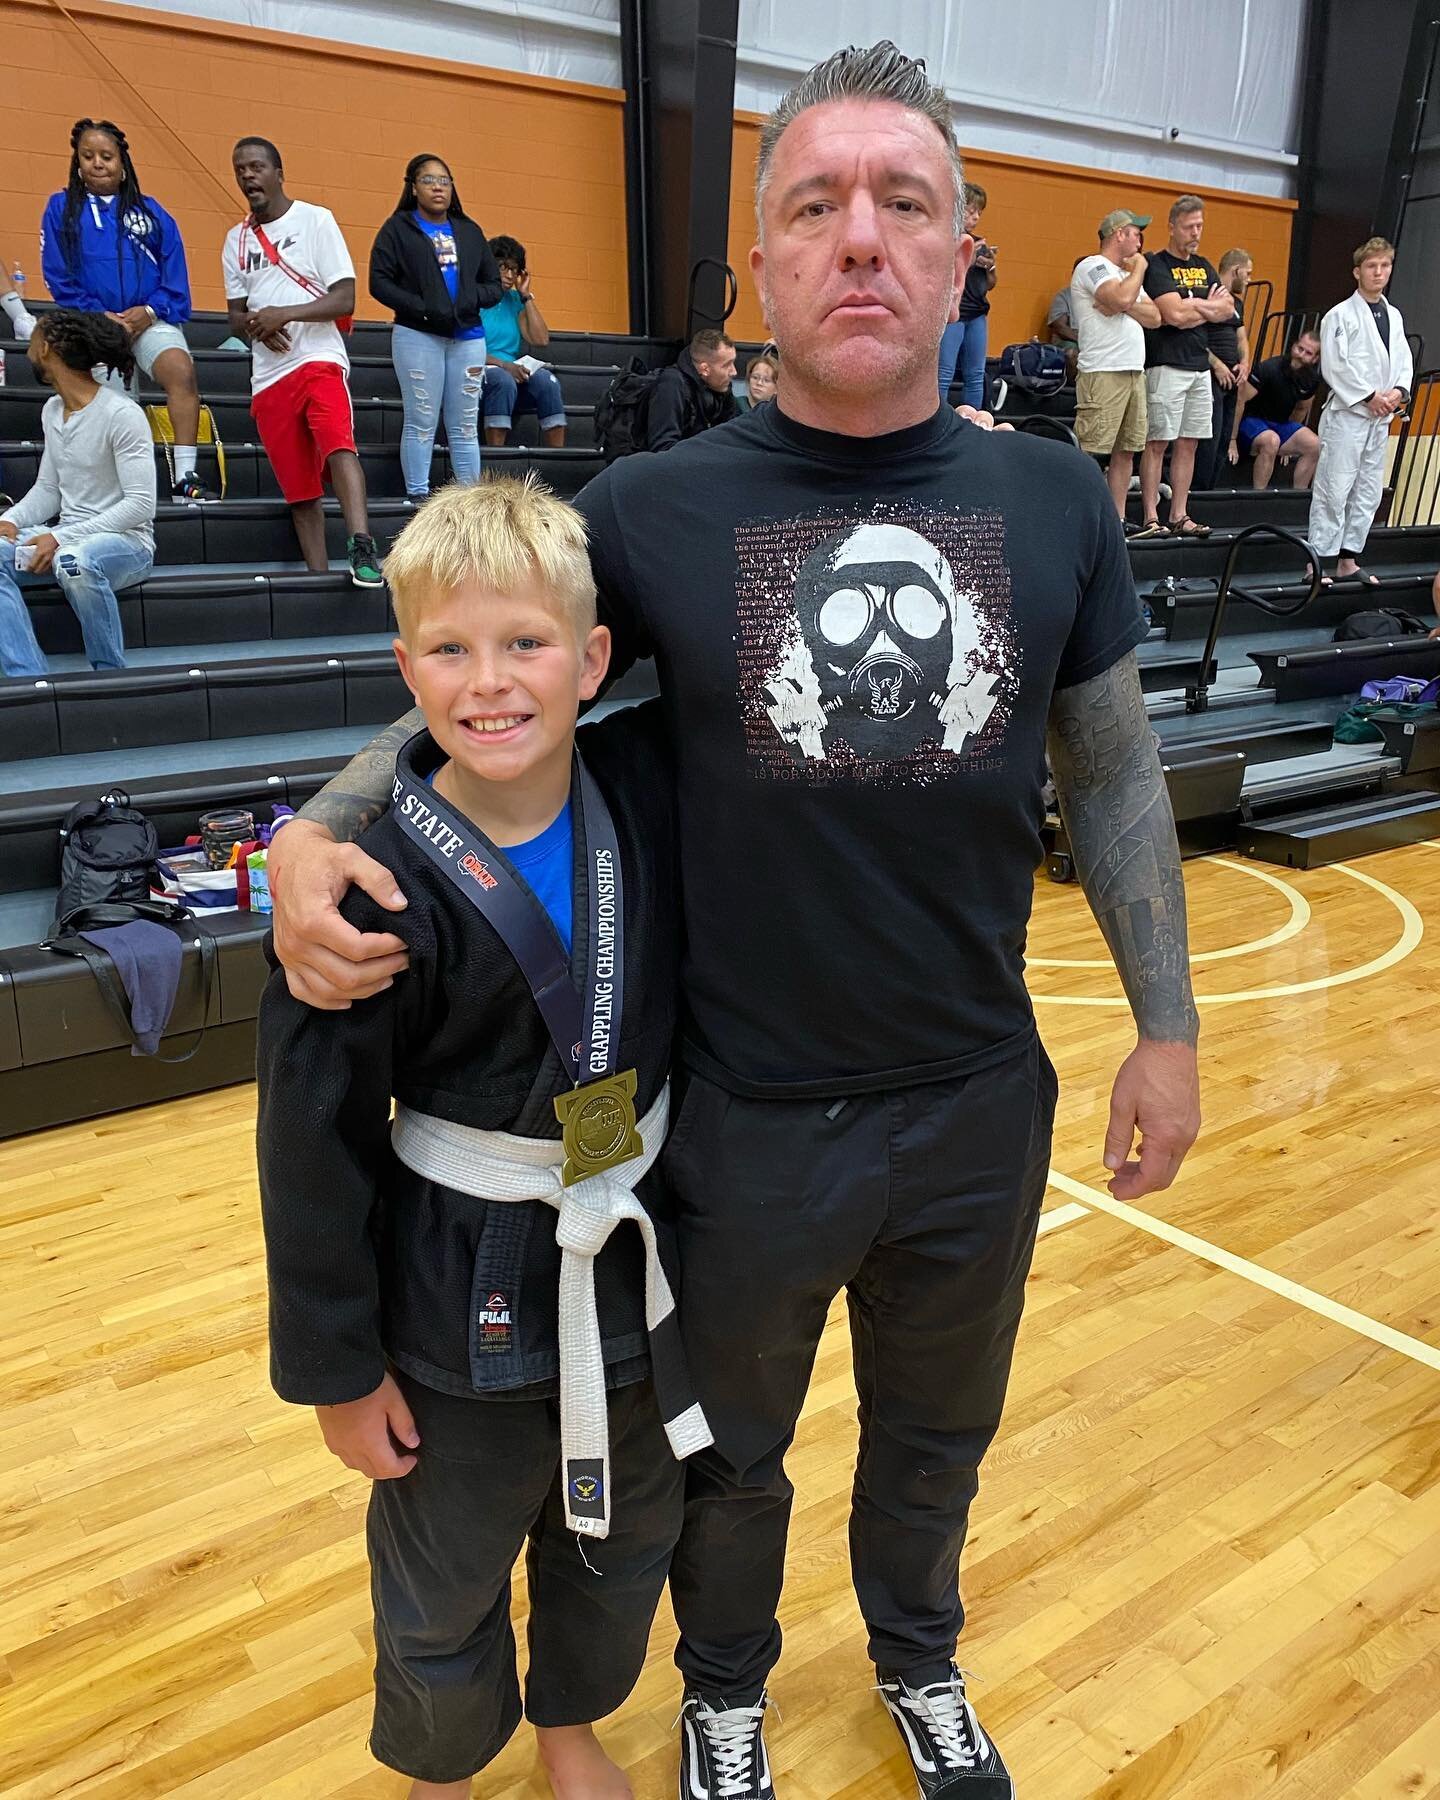 Great time at the Ohio Buckeye Grappling Tournament.
Was an honor to be able to coach Bridget, Lil Ray, and Cole to gold. 

#sascleveland #wartribe #wartapebrand #purusteam #vitalmimds #gripedo #neckflex #grappling #judo #jiujitsu #jiujitsucleveland 